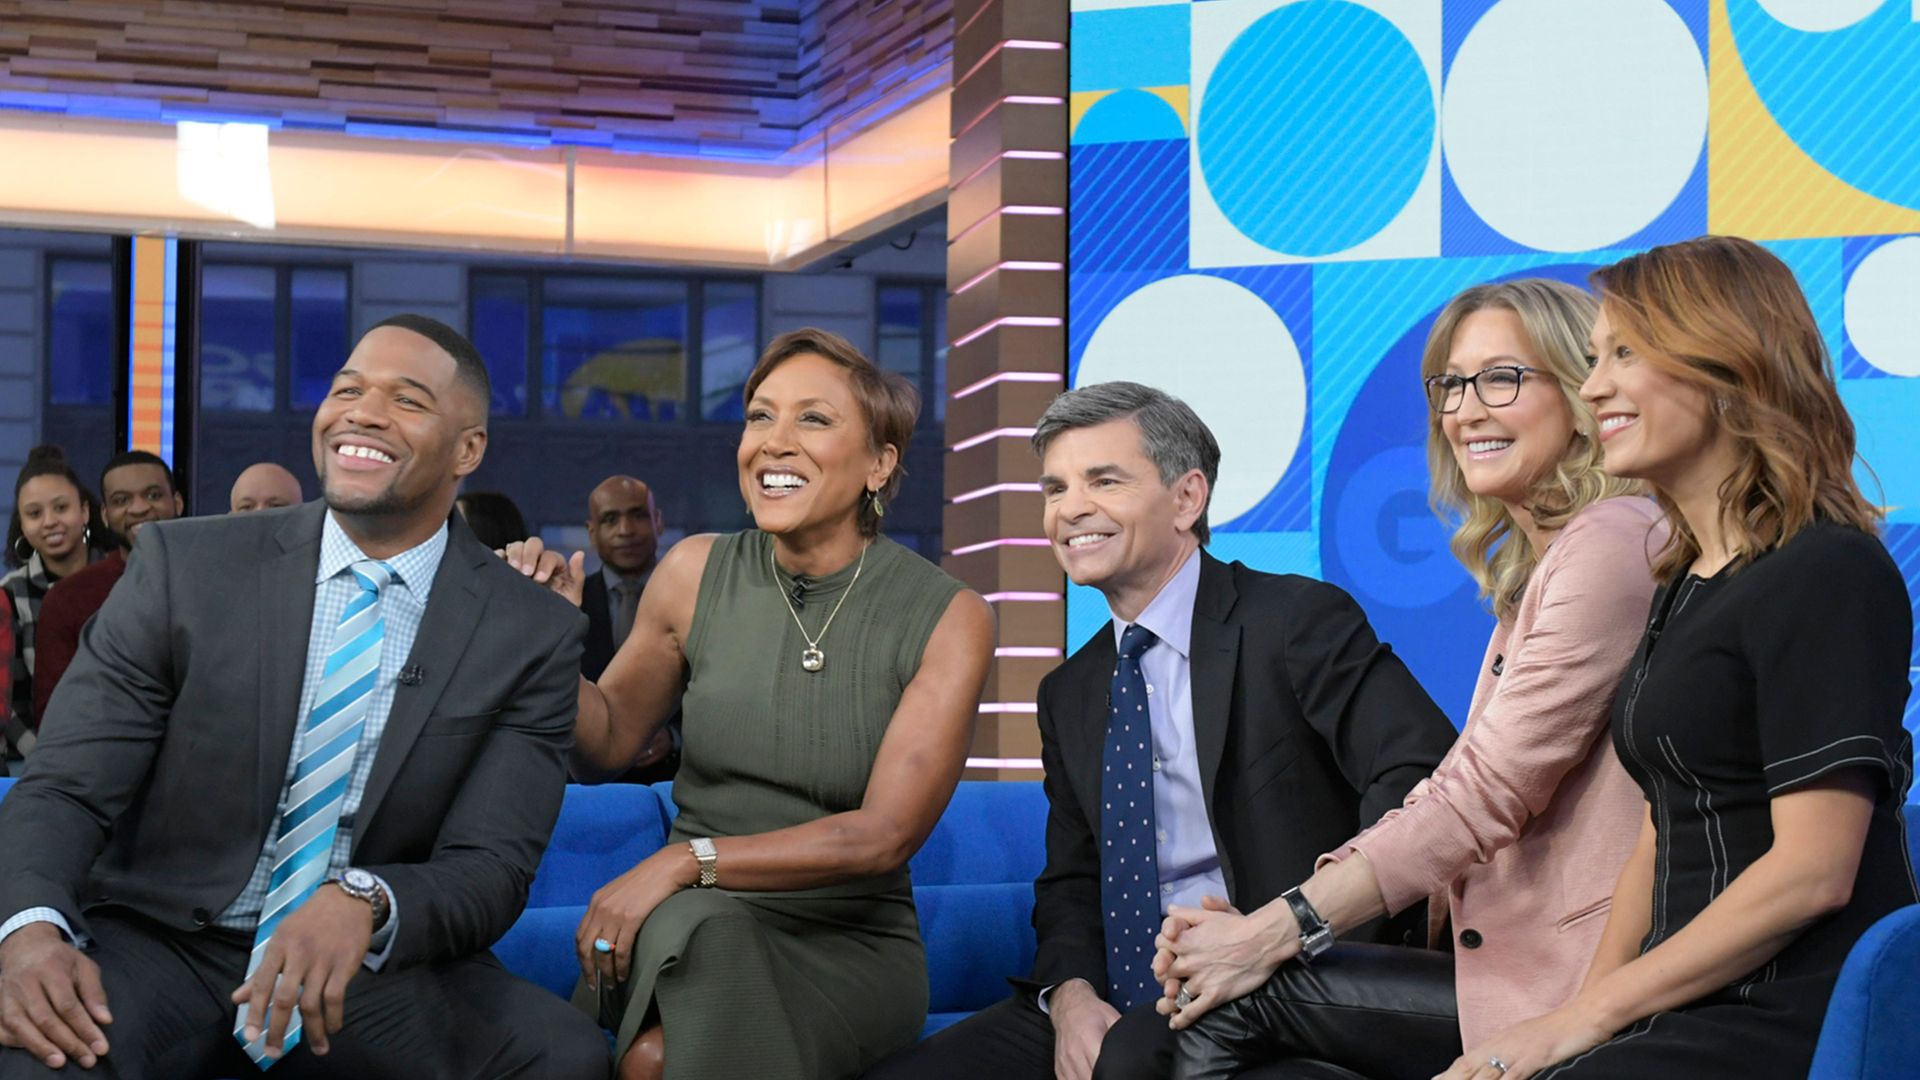 Michael Strahan, Robin Roberts, George Stephanopoulos, Lara Spencer, and Ginger Zee  on Good Morning America